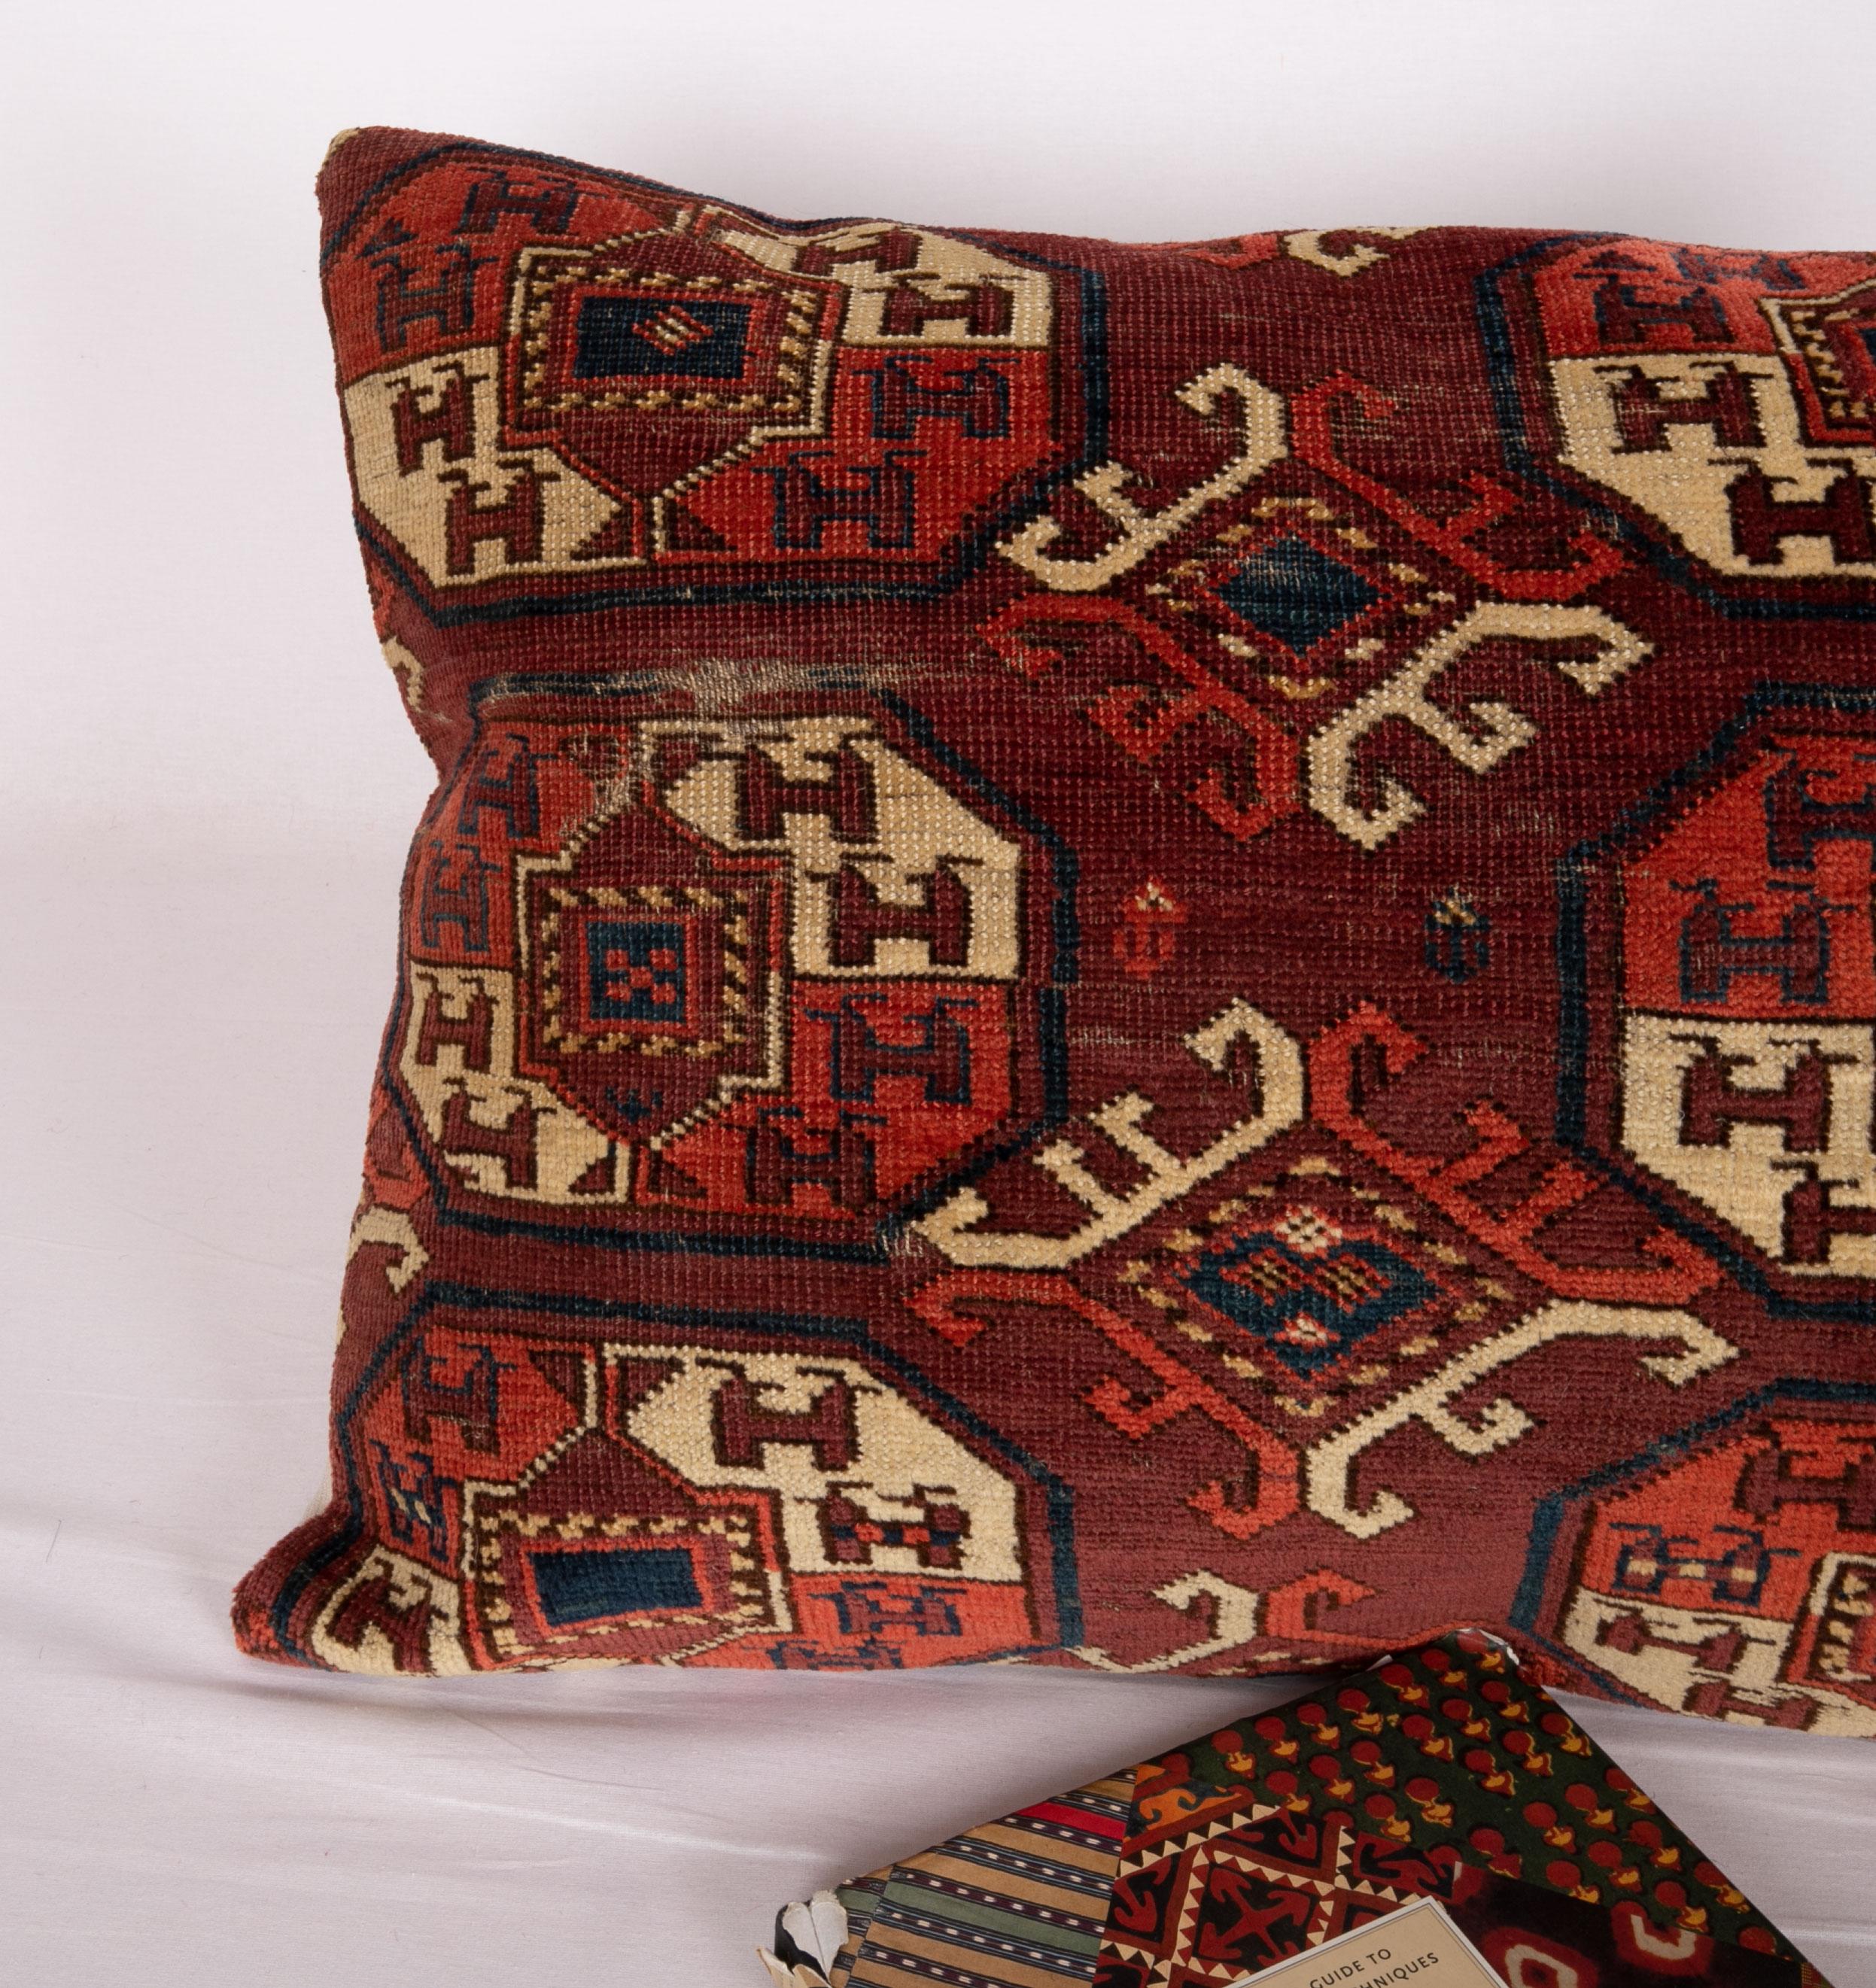 Hand-Knotted Antique Turkmen Rug Pillow Case Made from a 19th Century Turkmen Main Rug